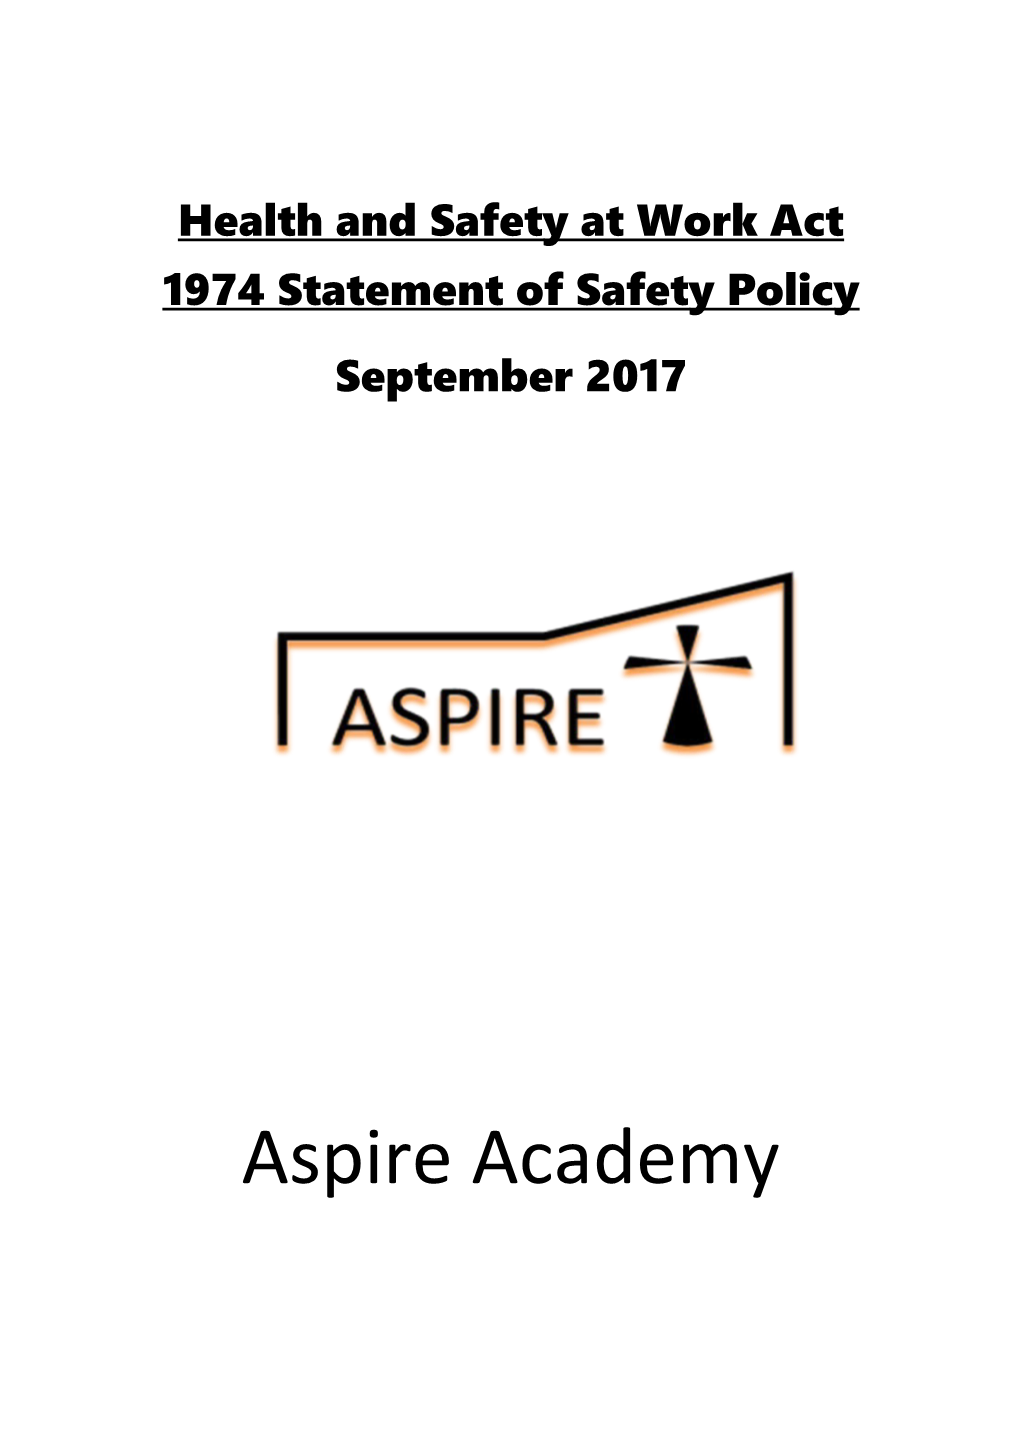 Health and Safety at Work Act 1974 Statement of Safety Policy